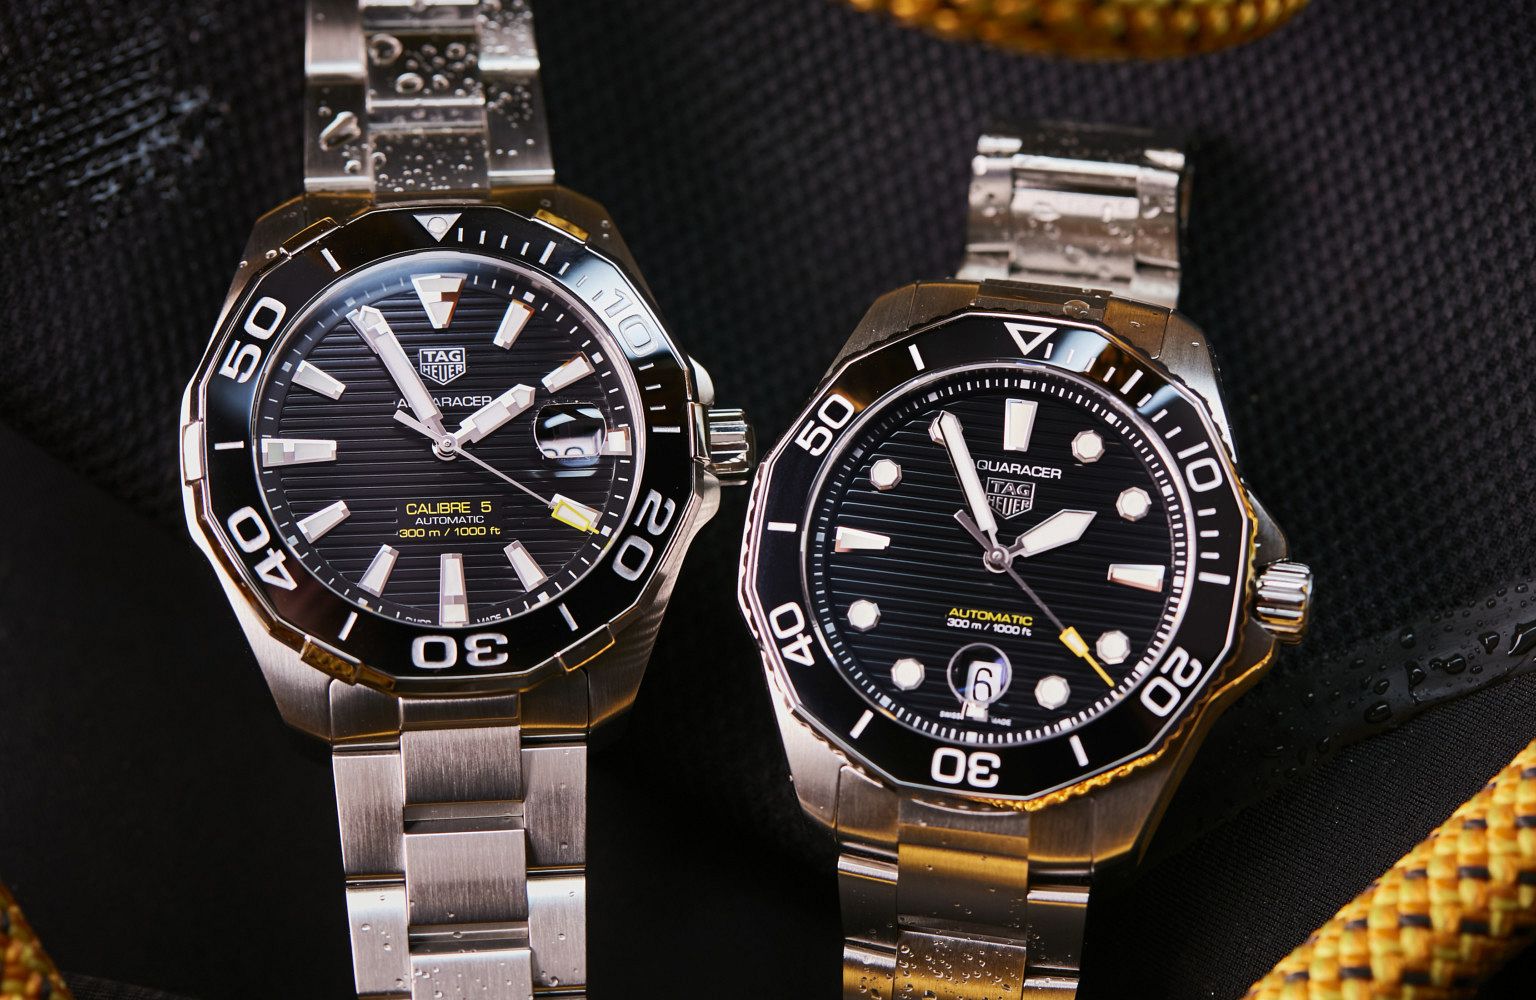 INDEPTH The new TAG Heuer Aquaracer Professional 300 collection is a